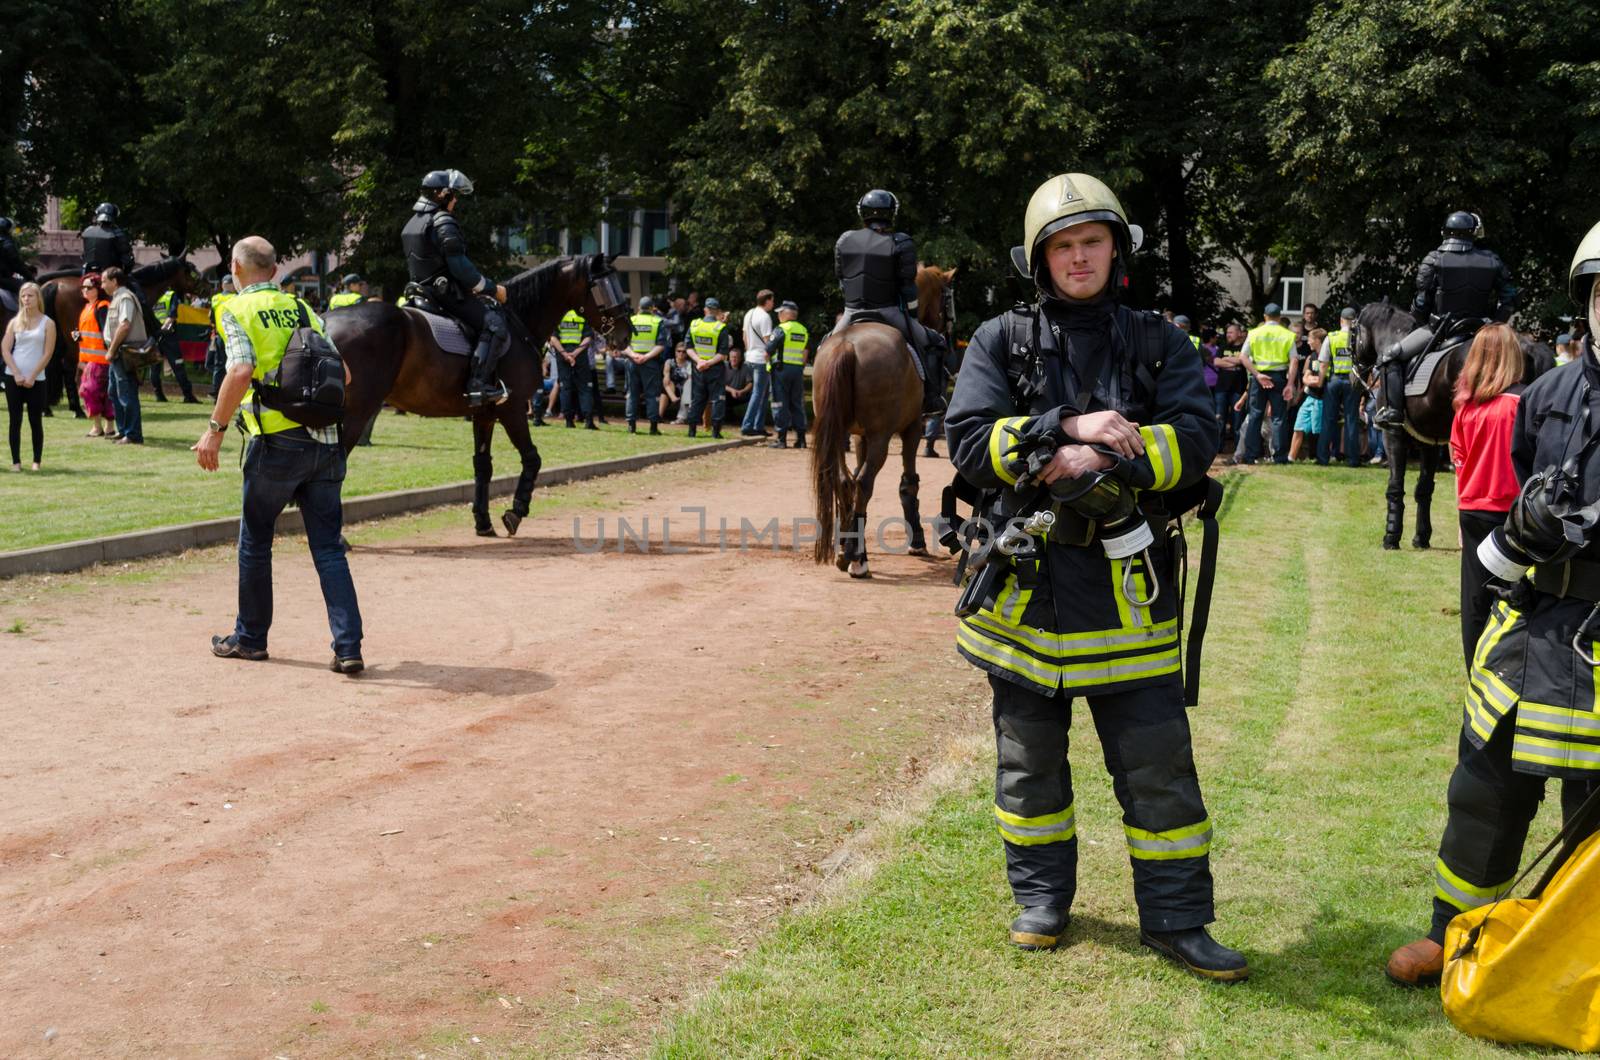 VILNIUS, LITHUANIA - JULY 27: rescue teams fireman with special clothing and equipment through large public event in the city park on July 27, 2013 in VILNIUS, Lithuania.